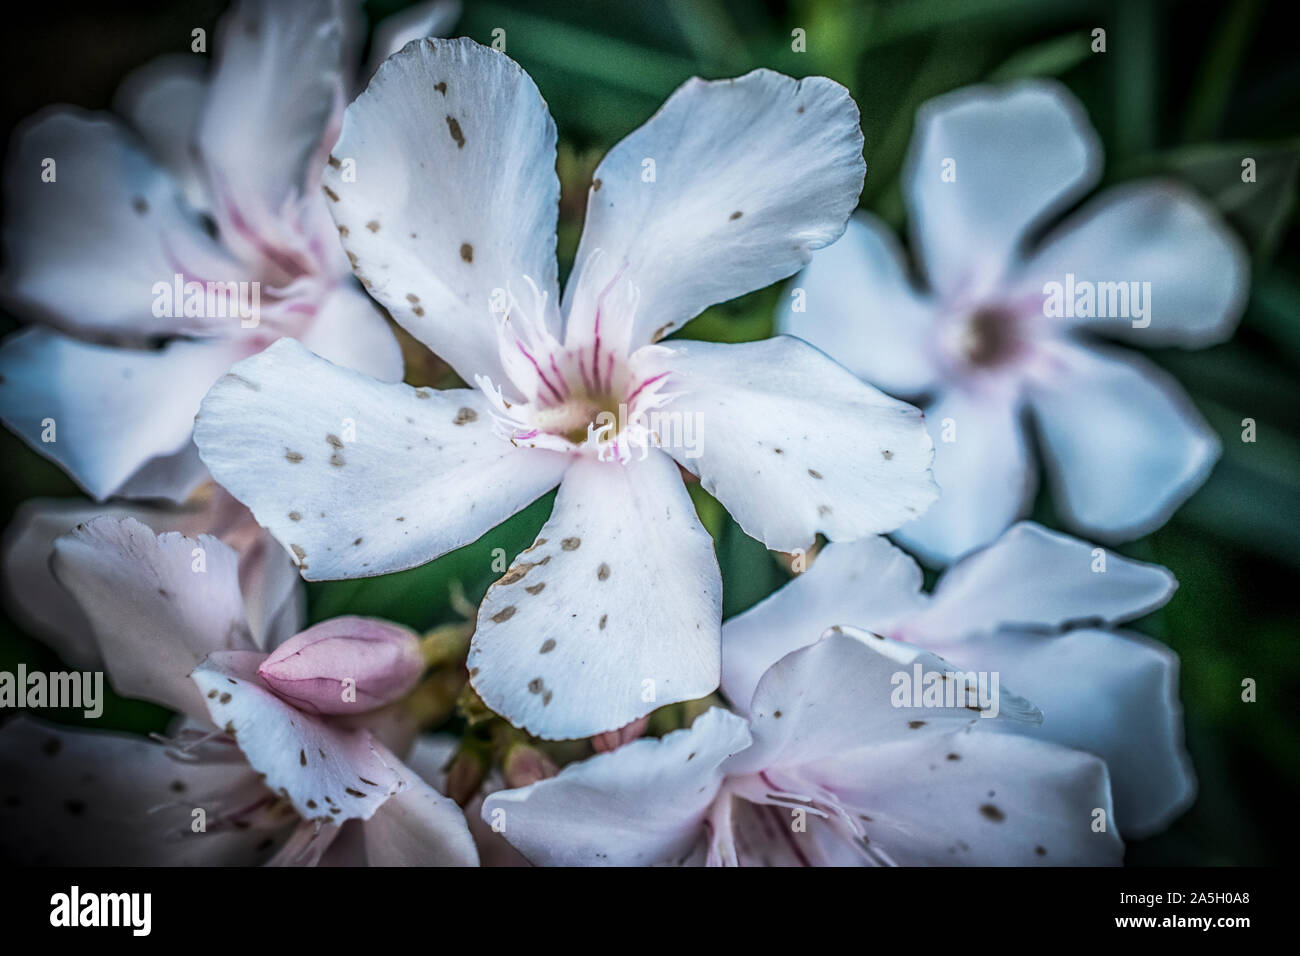 A close-up of white oleander flowers Stock Photo